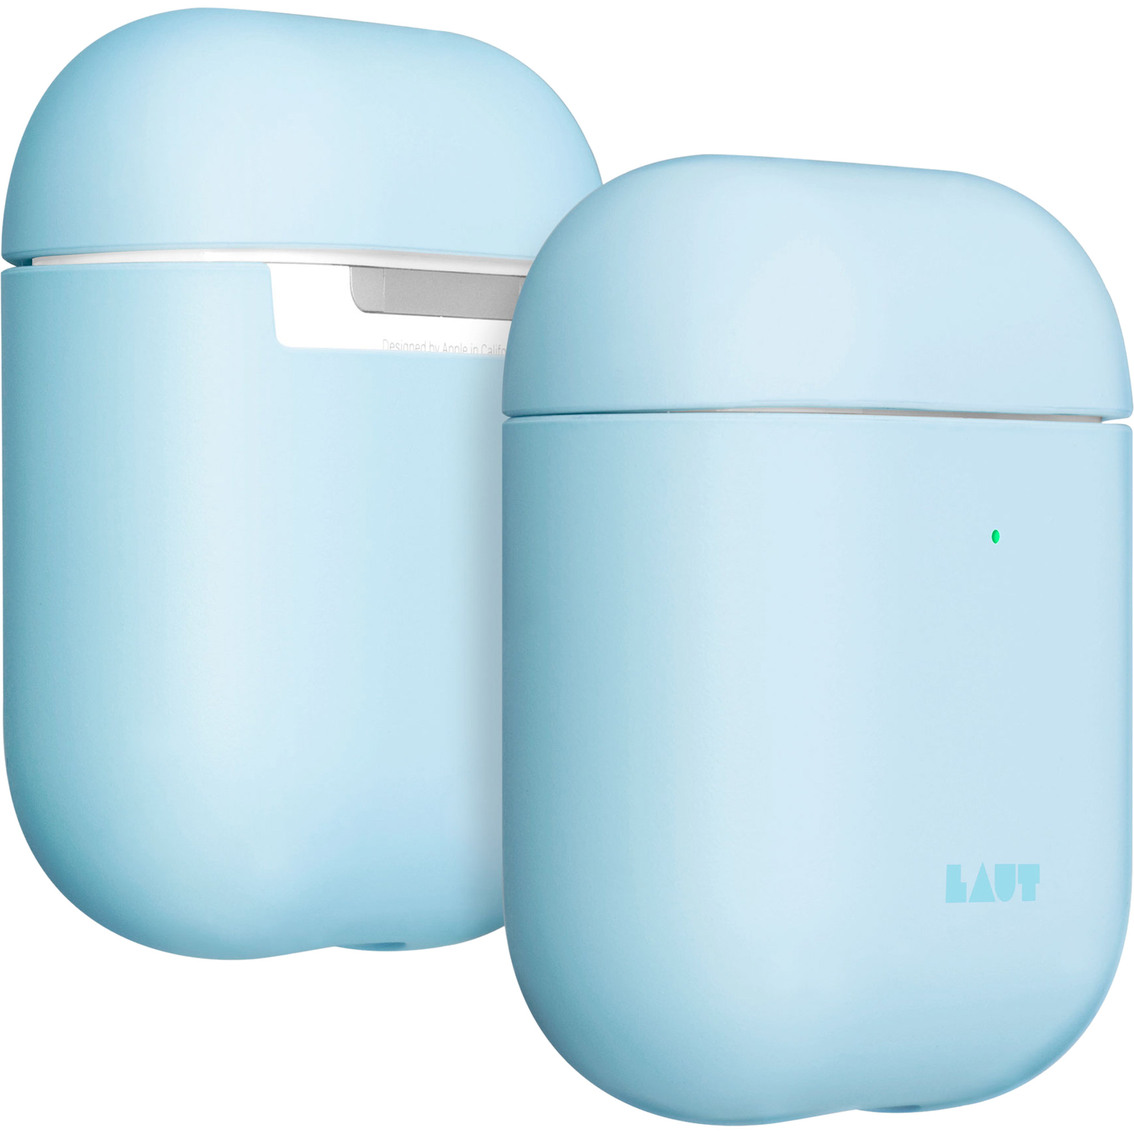 Laut Huex Pastels Case for AirPods - Image 5 of 5